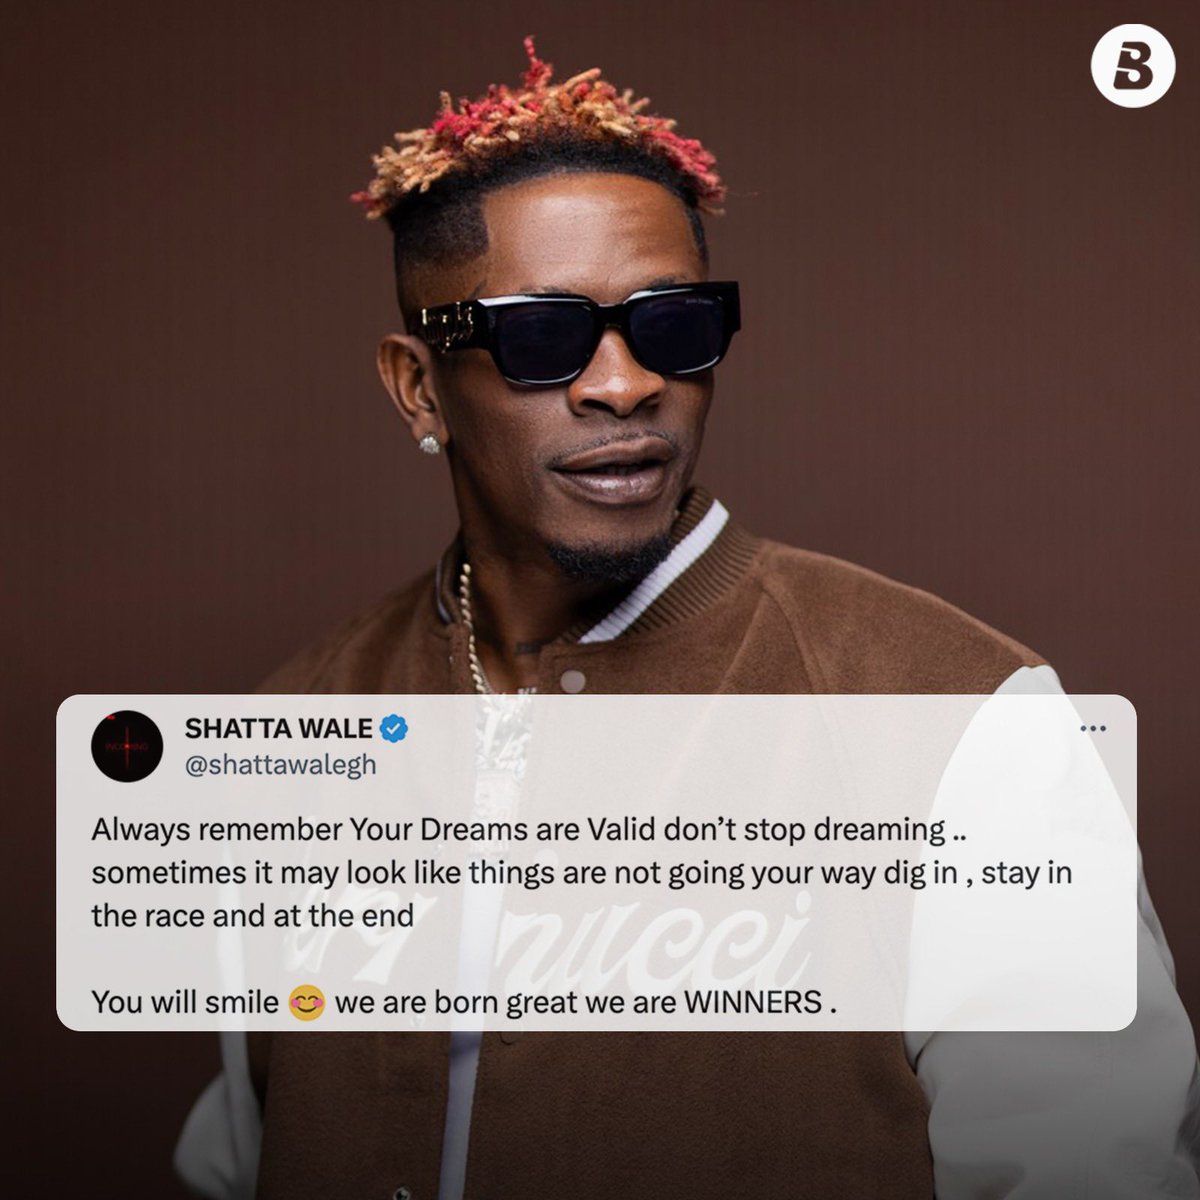 As the month comes to an end, things may not be as expected but keep your eyes on track and DON’T STOP DREAMING💪🏽! 

Happy New Week! 

✍🏽@shattawalegh 

#HomeOfMusic #MondayMotivation #ShattaMovement #Incoming